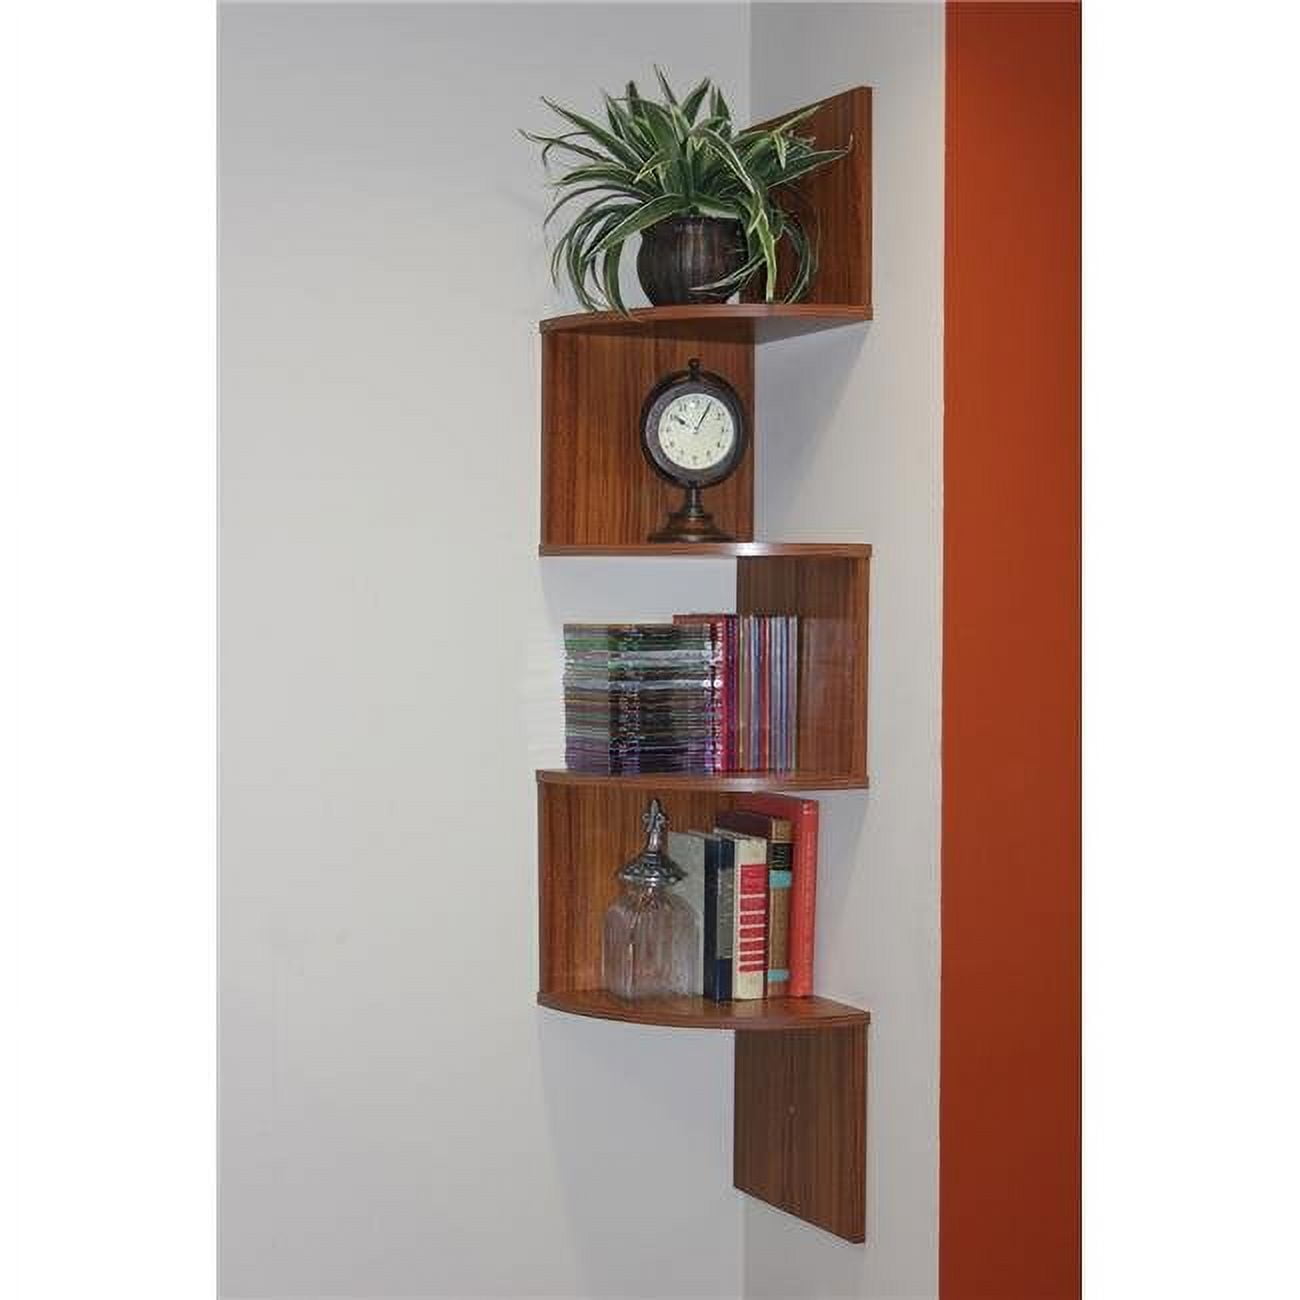 Picture of 4D Concepts 99200 Hanging Corner Storage, Fruitwood